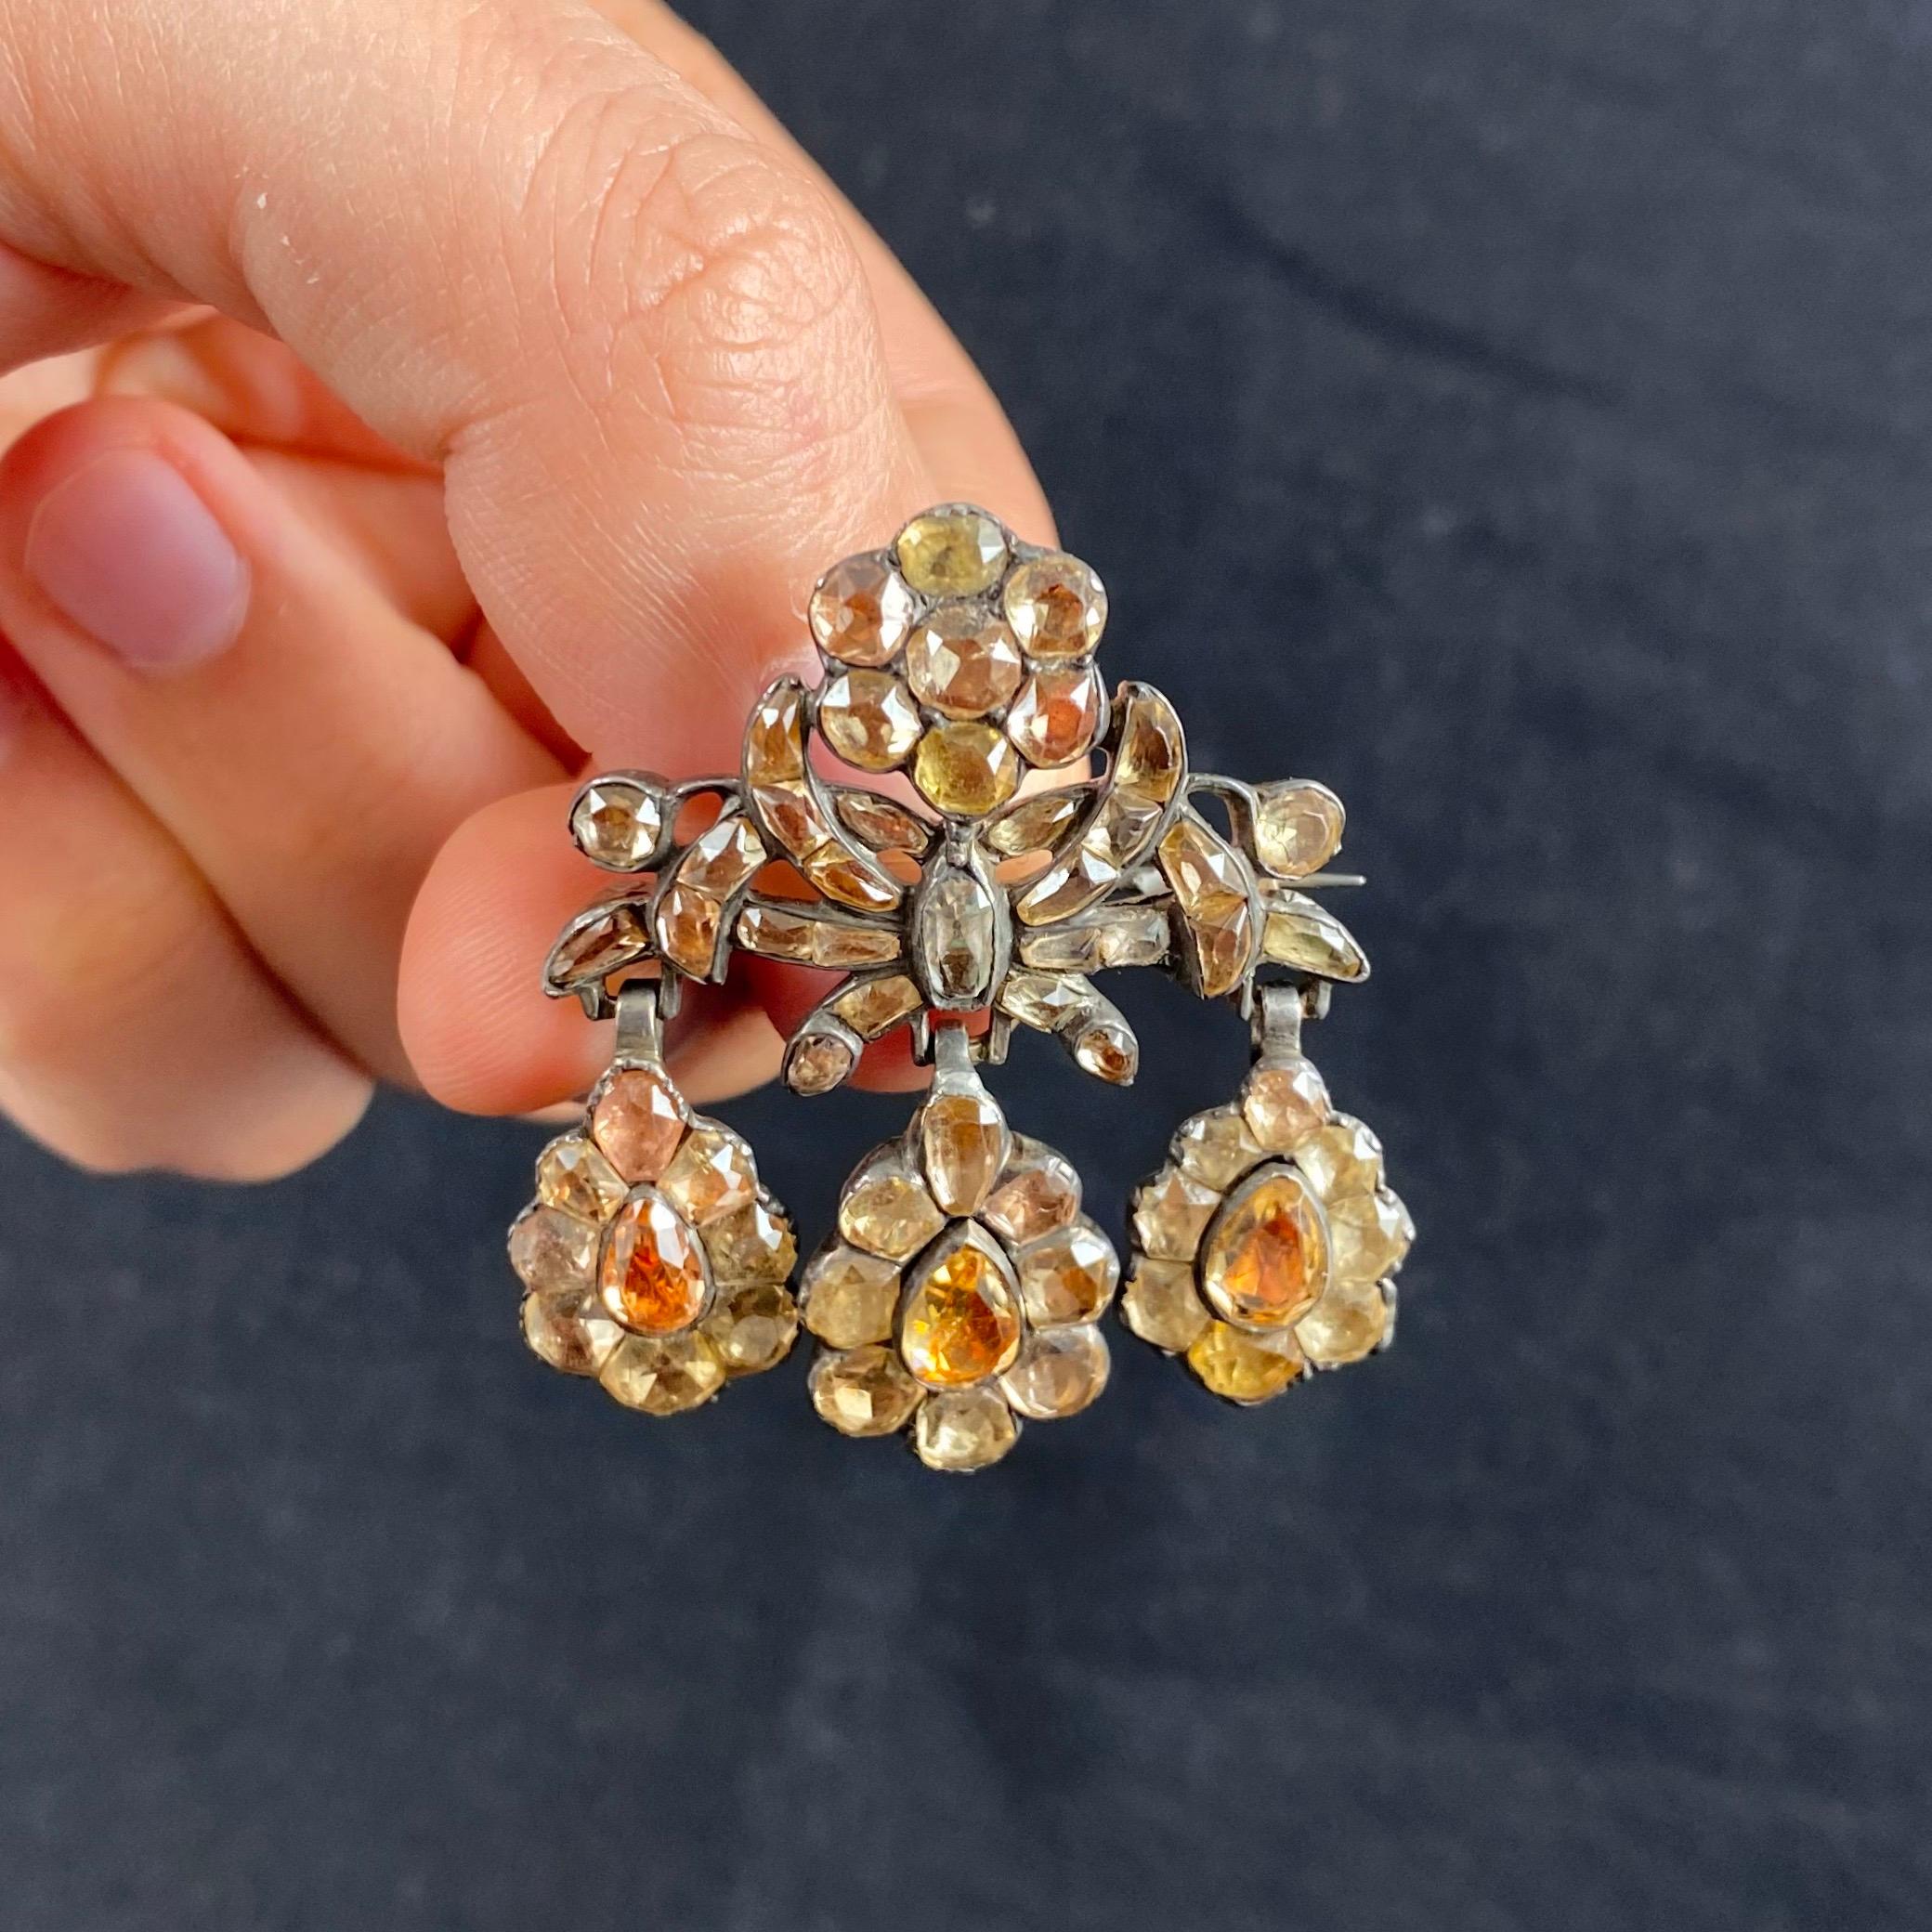 Antique 18th Century Foiled Imperial Topaz Girandole Brooch in Silver, Portuguese, circa 1770, cased. Set throughout with russet-colored topazes of different shades and shapes (including antique cushion, pear, circular and calibre), this brooch is